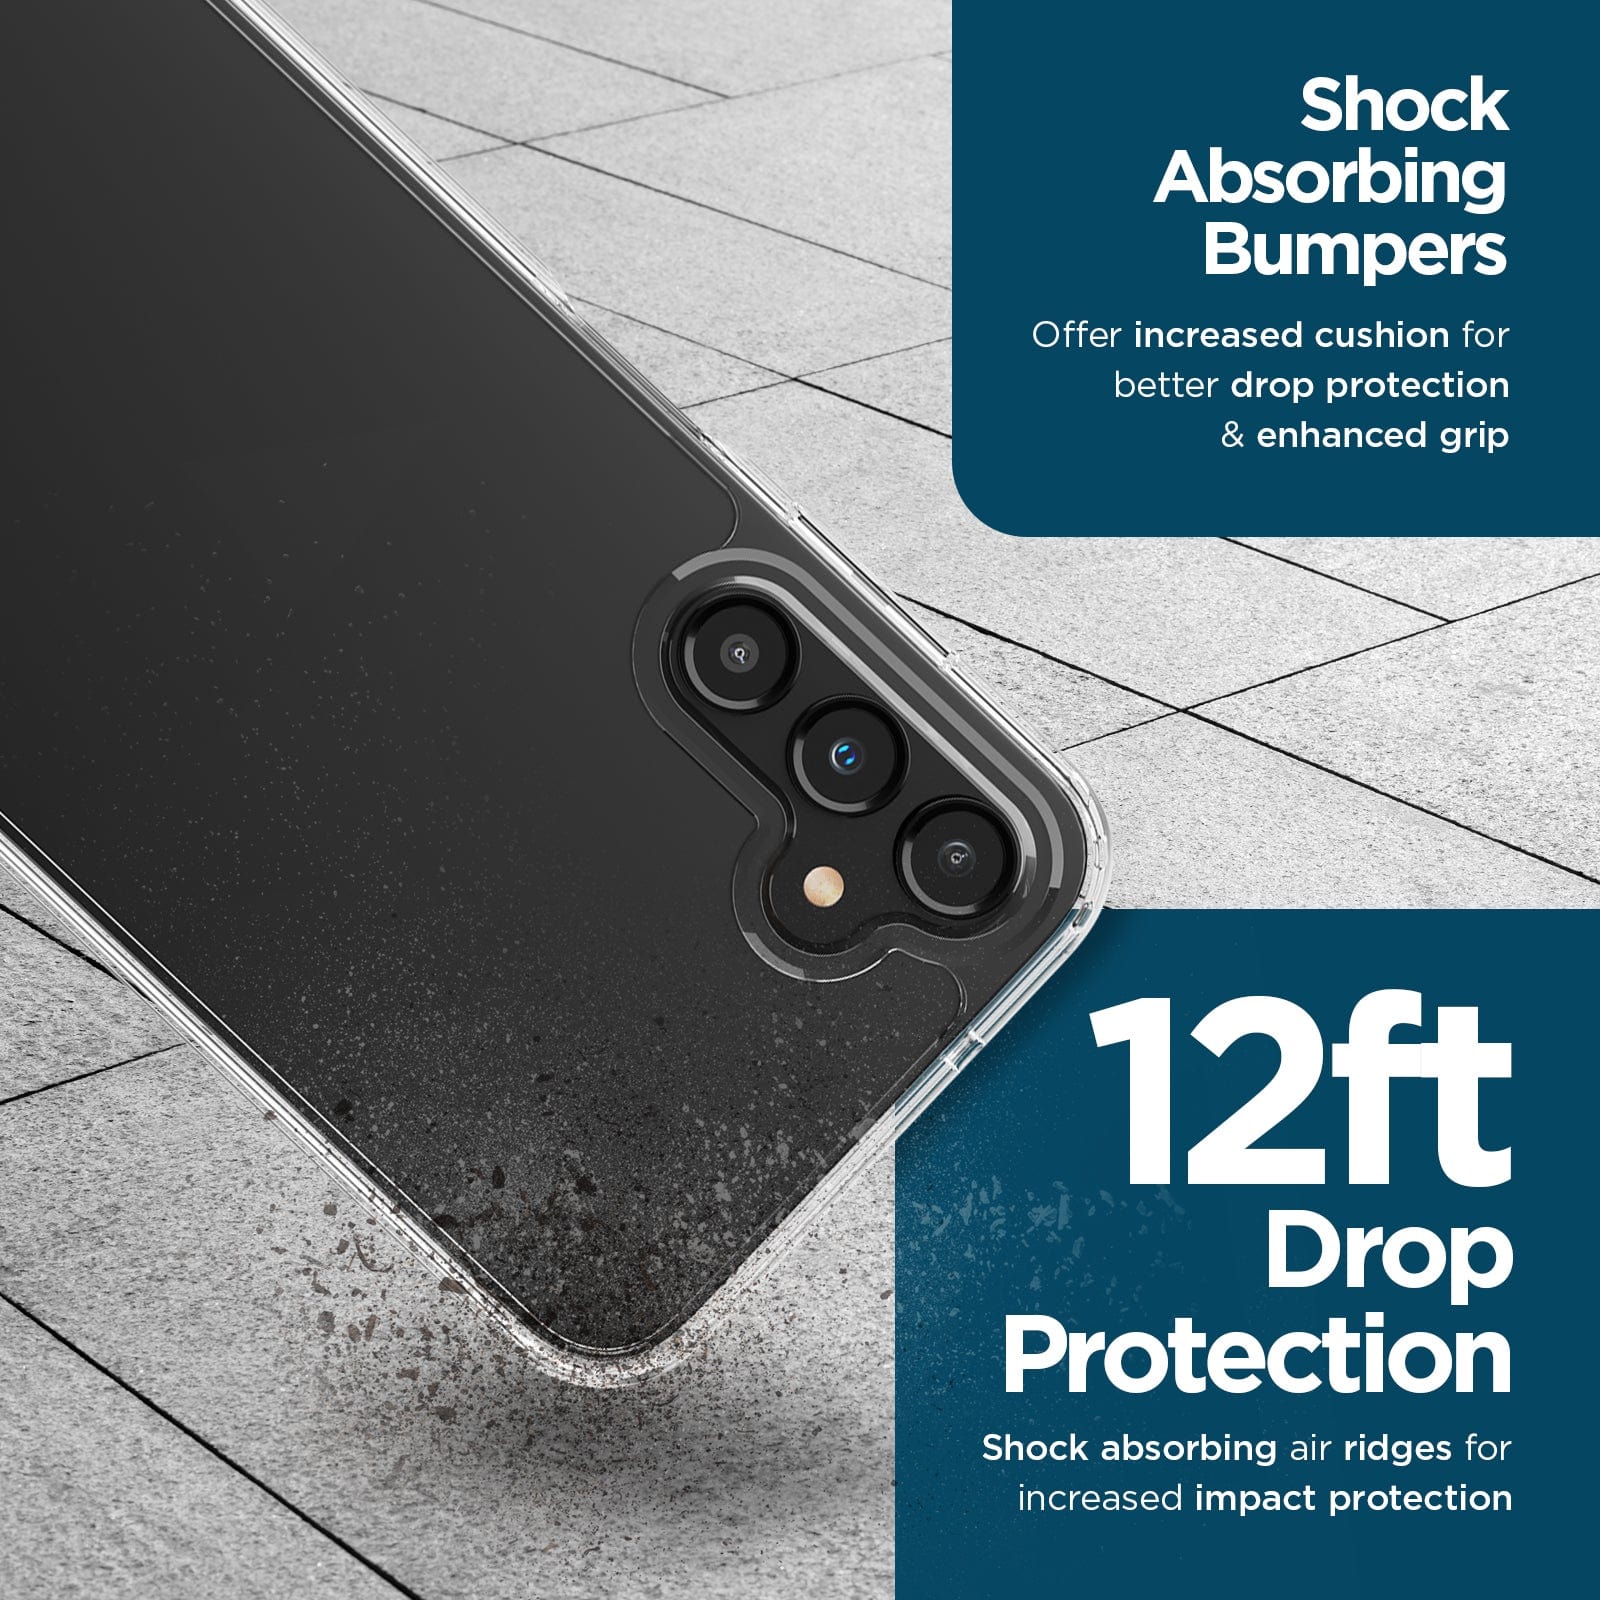 Shock absorbing bumpers. Offer increased cushion for better drop protection & enhanced grip. 12ft drop protection. shock absorbing air ridges for increased impact protection. 